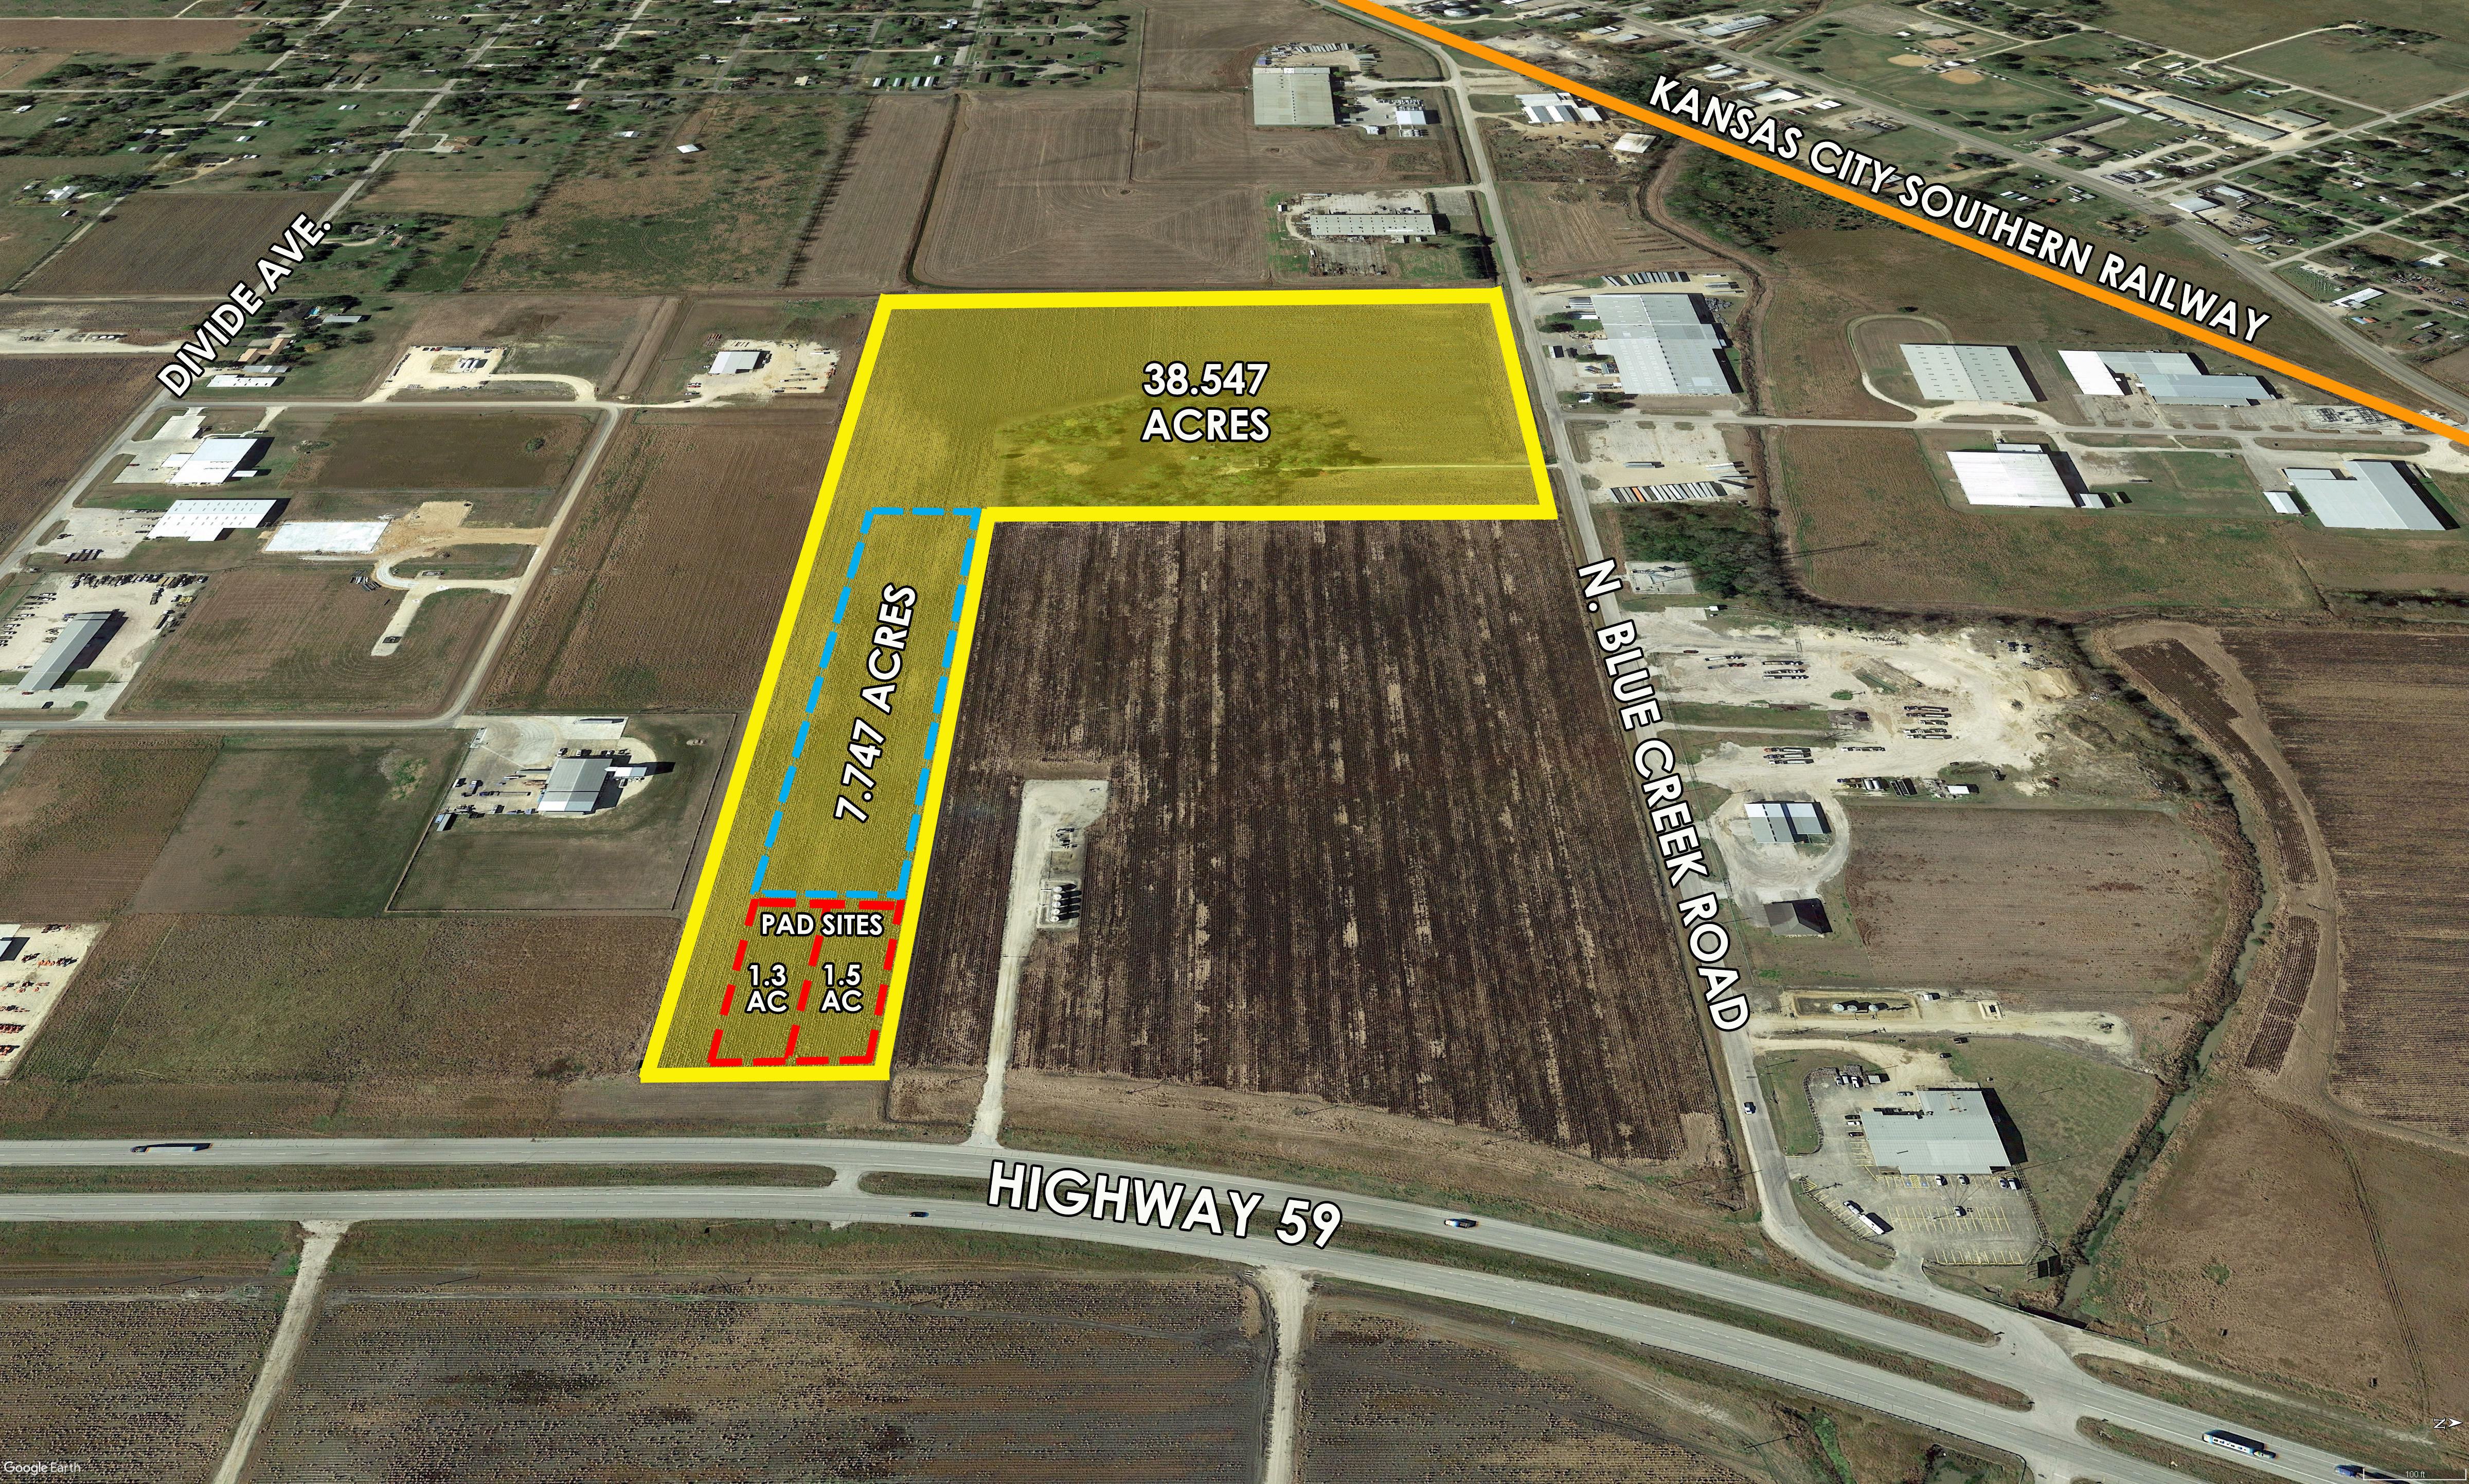 Pad Sites - 1 mile east of downtown El Campo